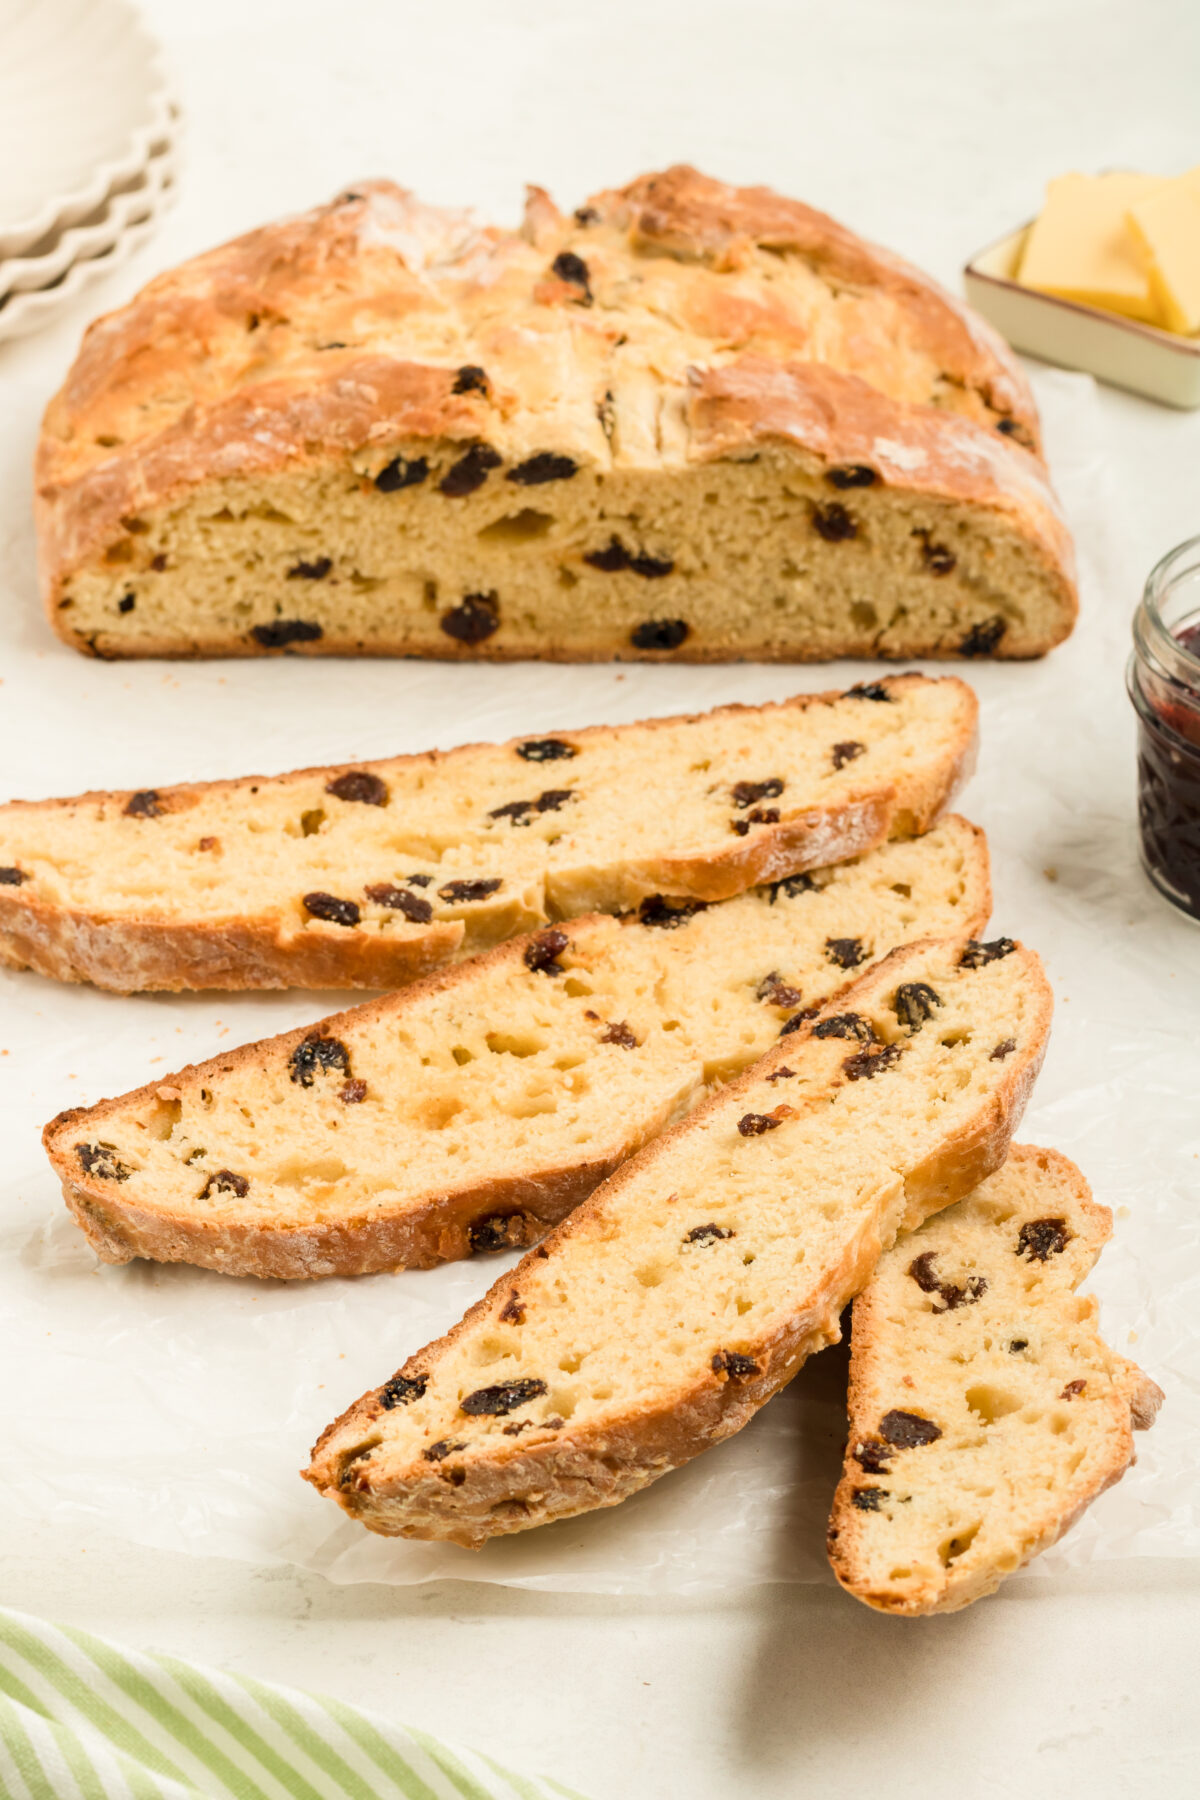 Craving delicious Irish soda bread for St. Patrick's Day? Look no further than this easy recipe, complete with raisins and a crispy crust.